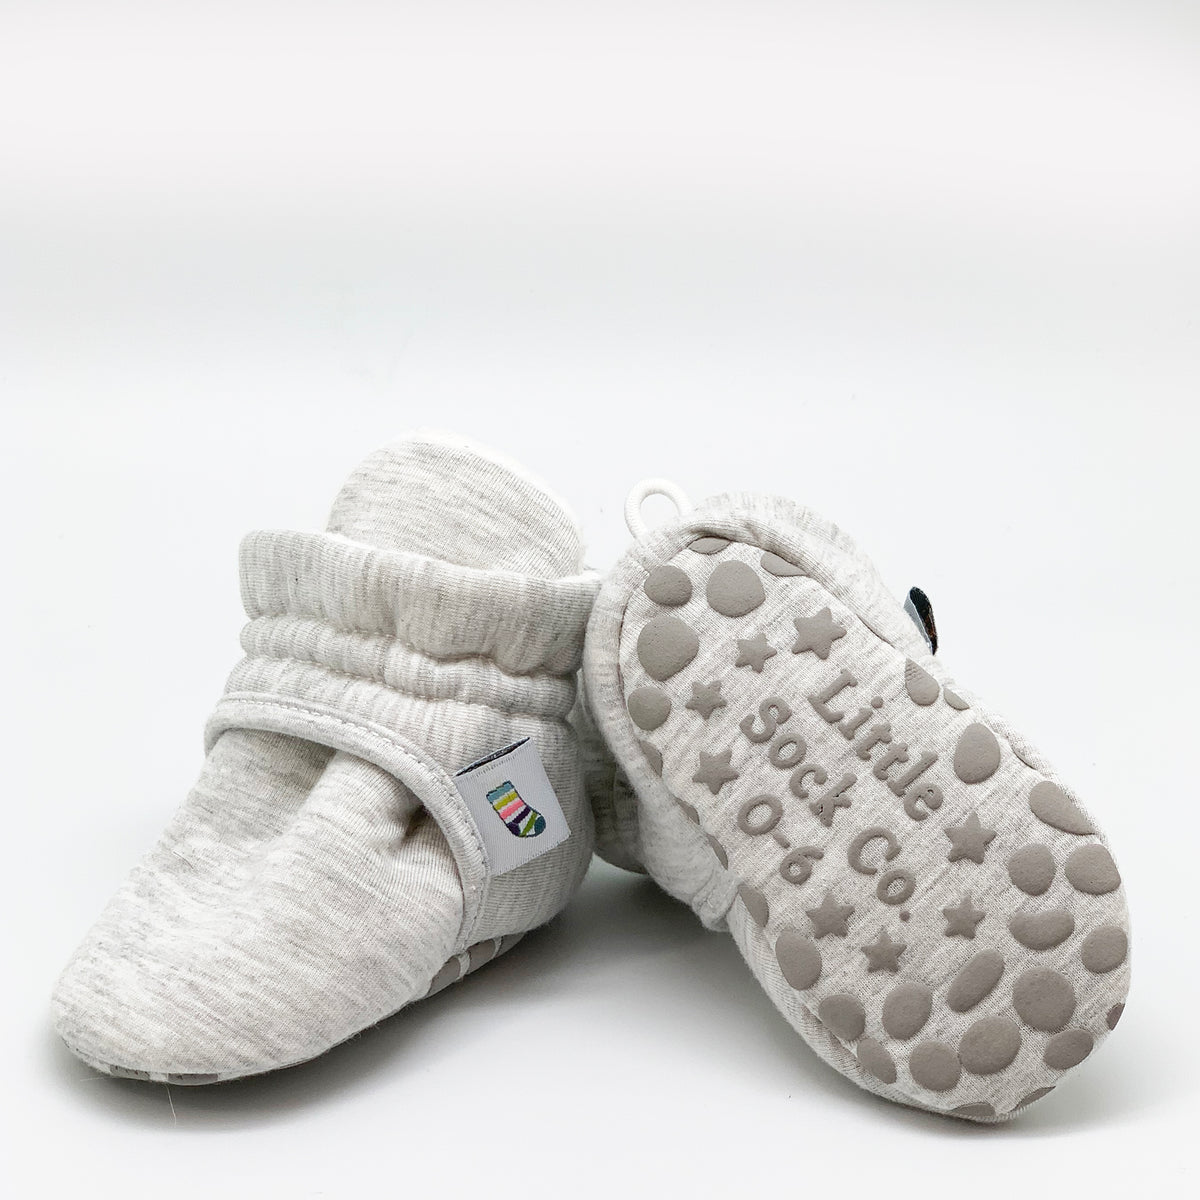 Grey bootie non slip slipper for babies. Pair view.